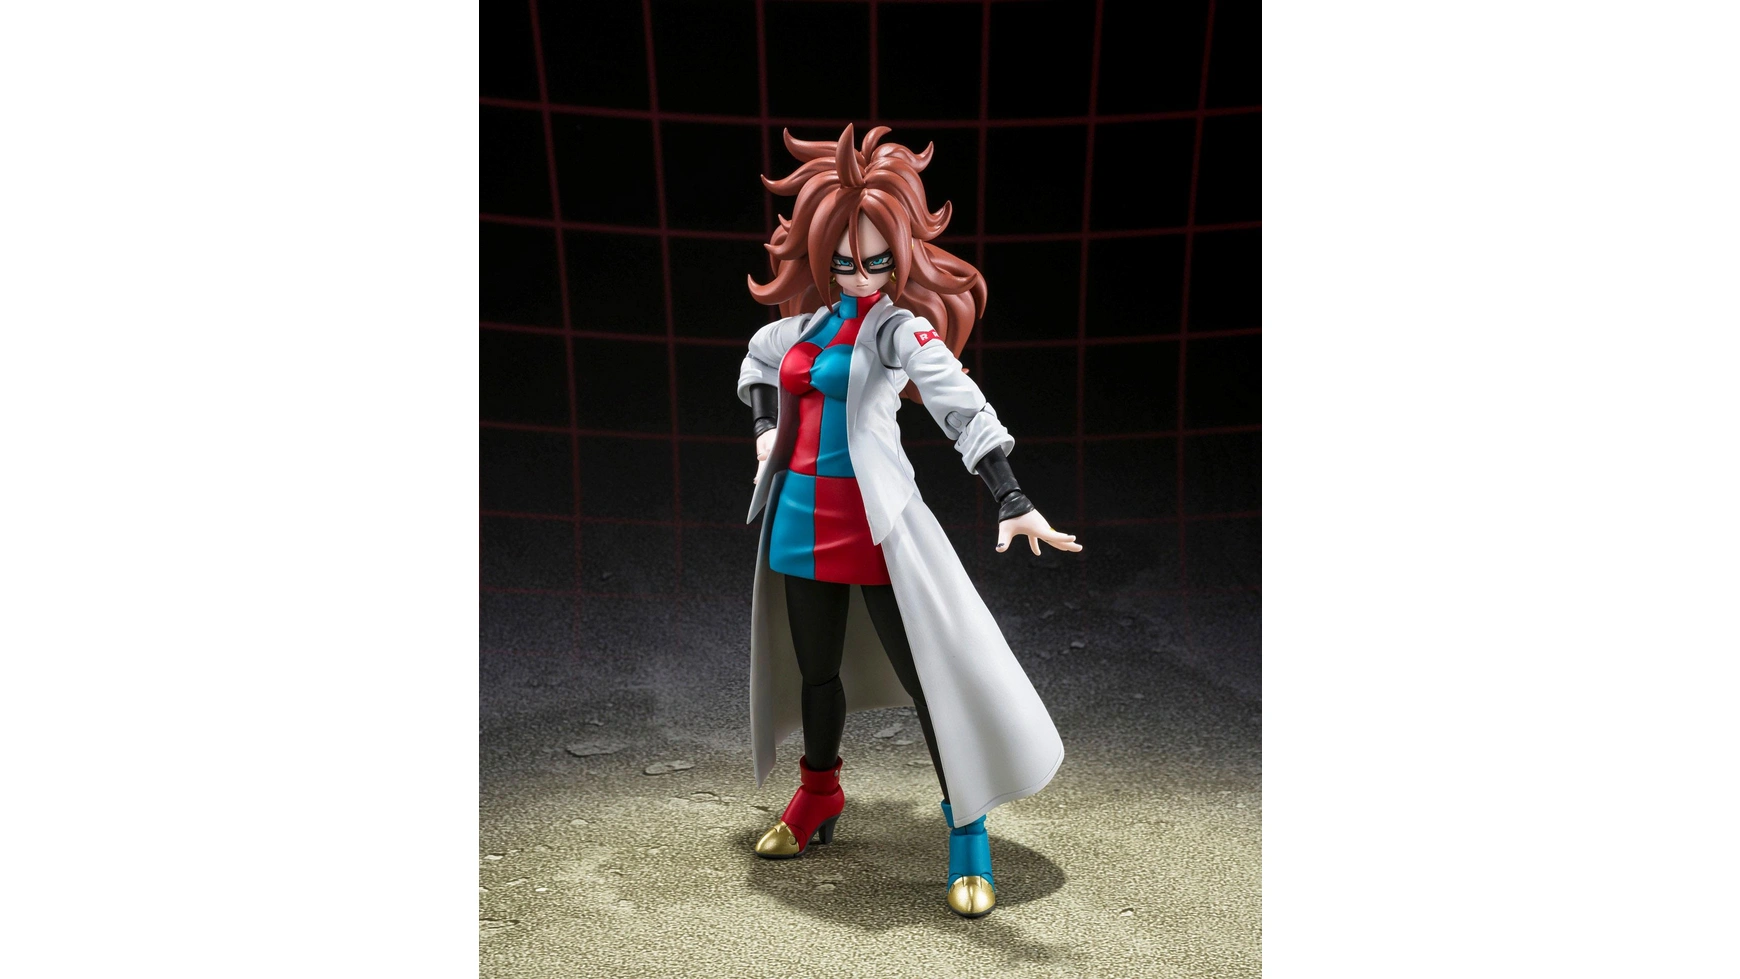 Dragon Ball FighterZ СХ Фигурка Figuarts Android 21 (лабораторный халат), 15 см, аниме-фигурка dragon ball fighterz fighterz pass